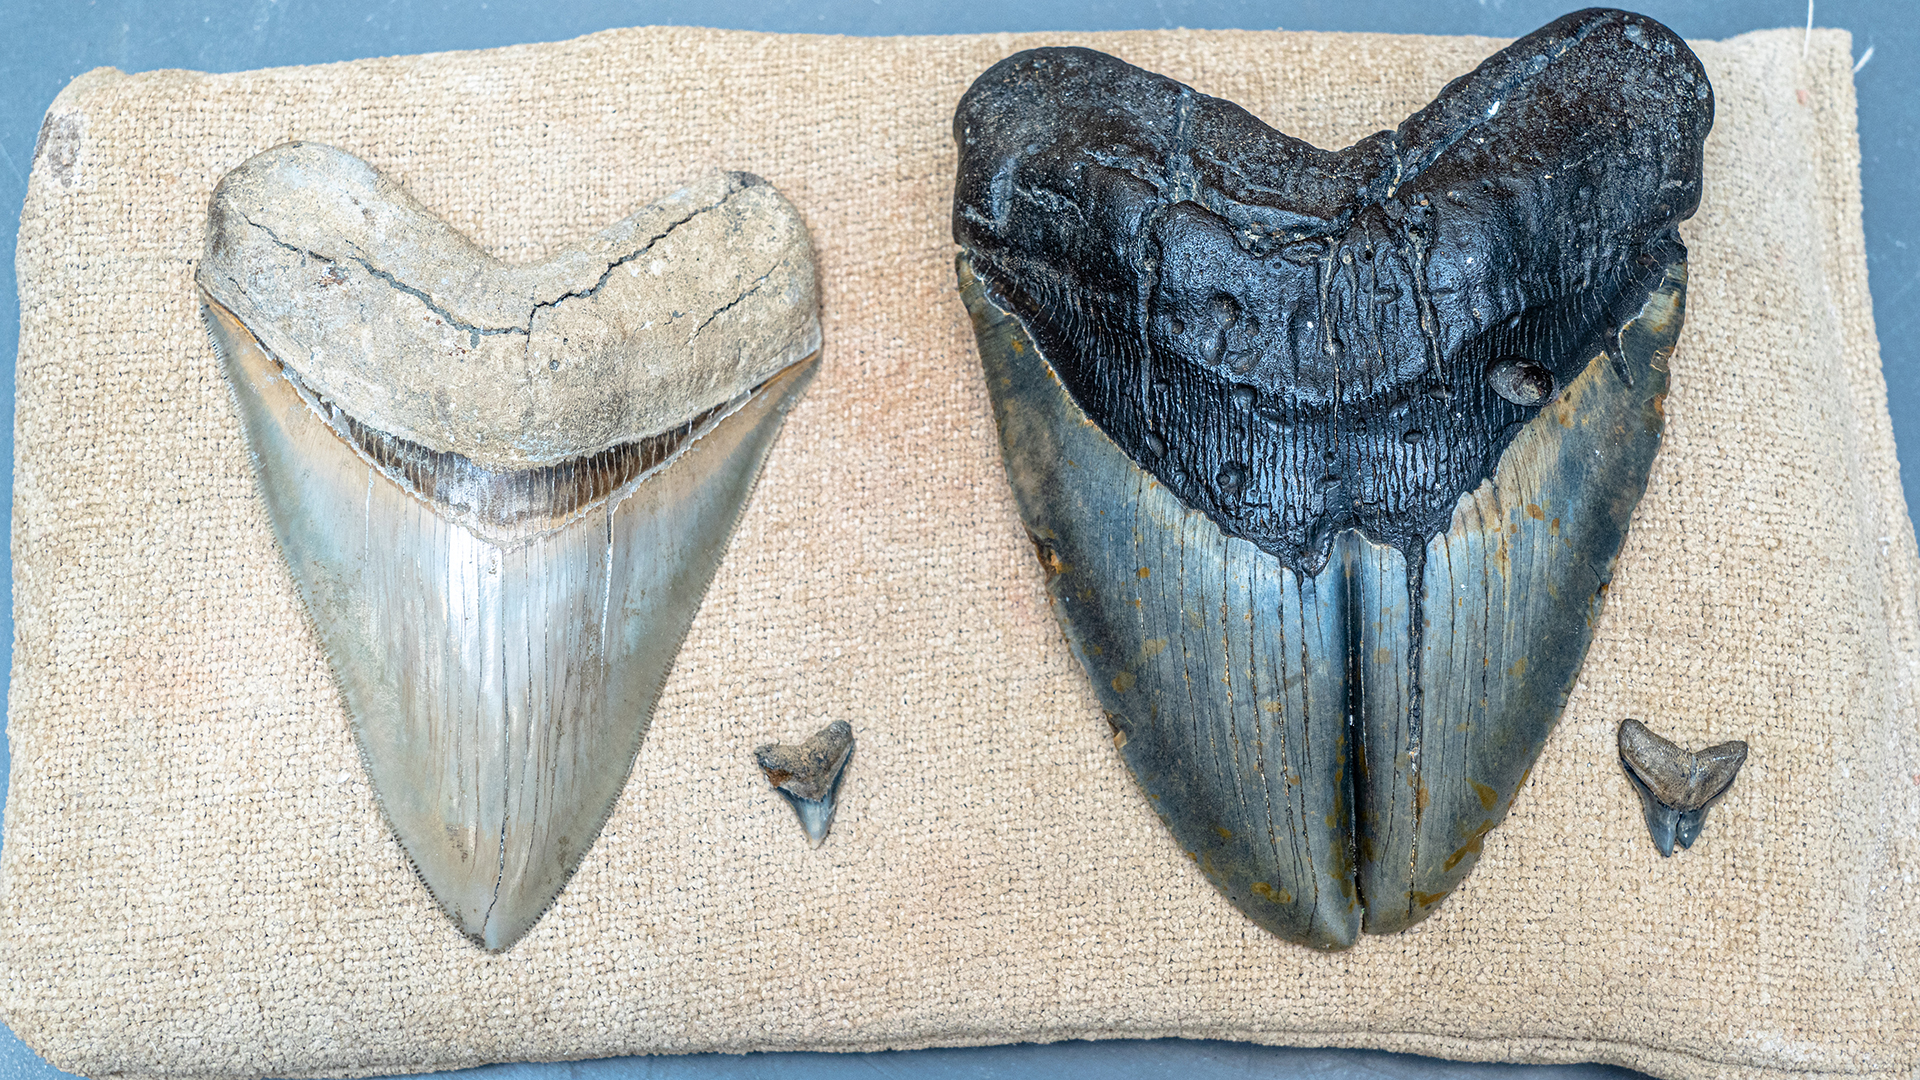 Normal teeth alongside deformed teeth from two shark species: extinct Otodus megalodon and Carcharhinus leucas, which still exists today.